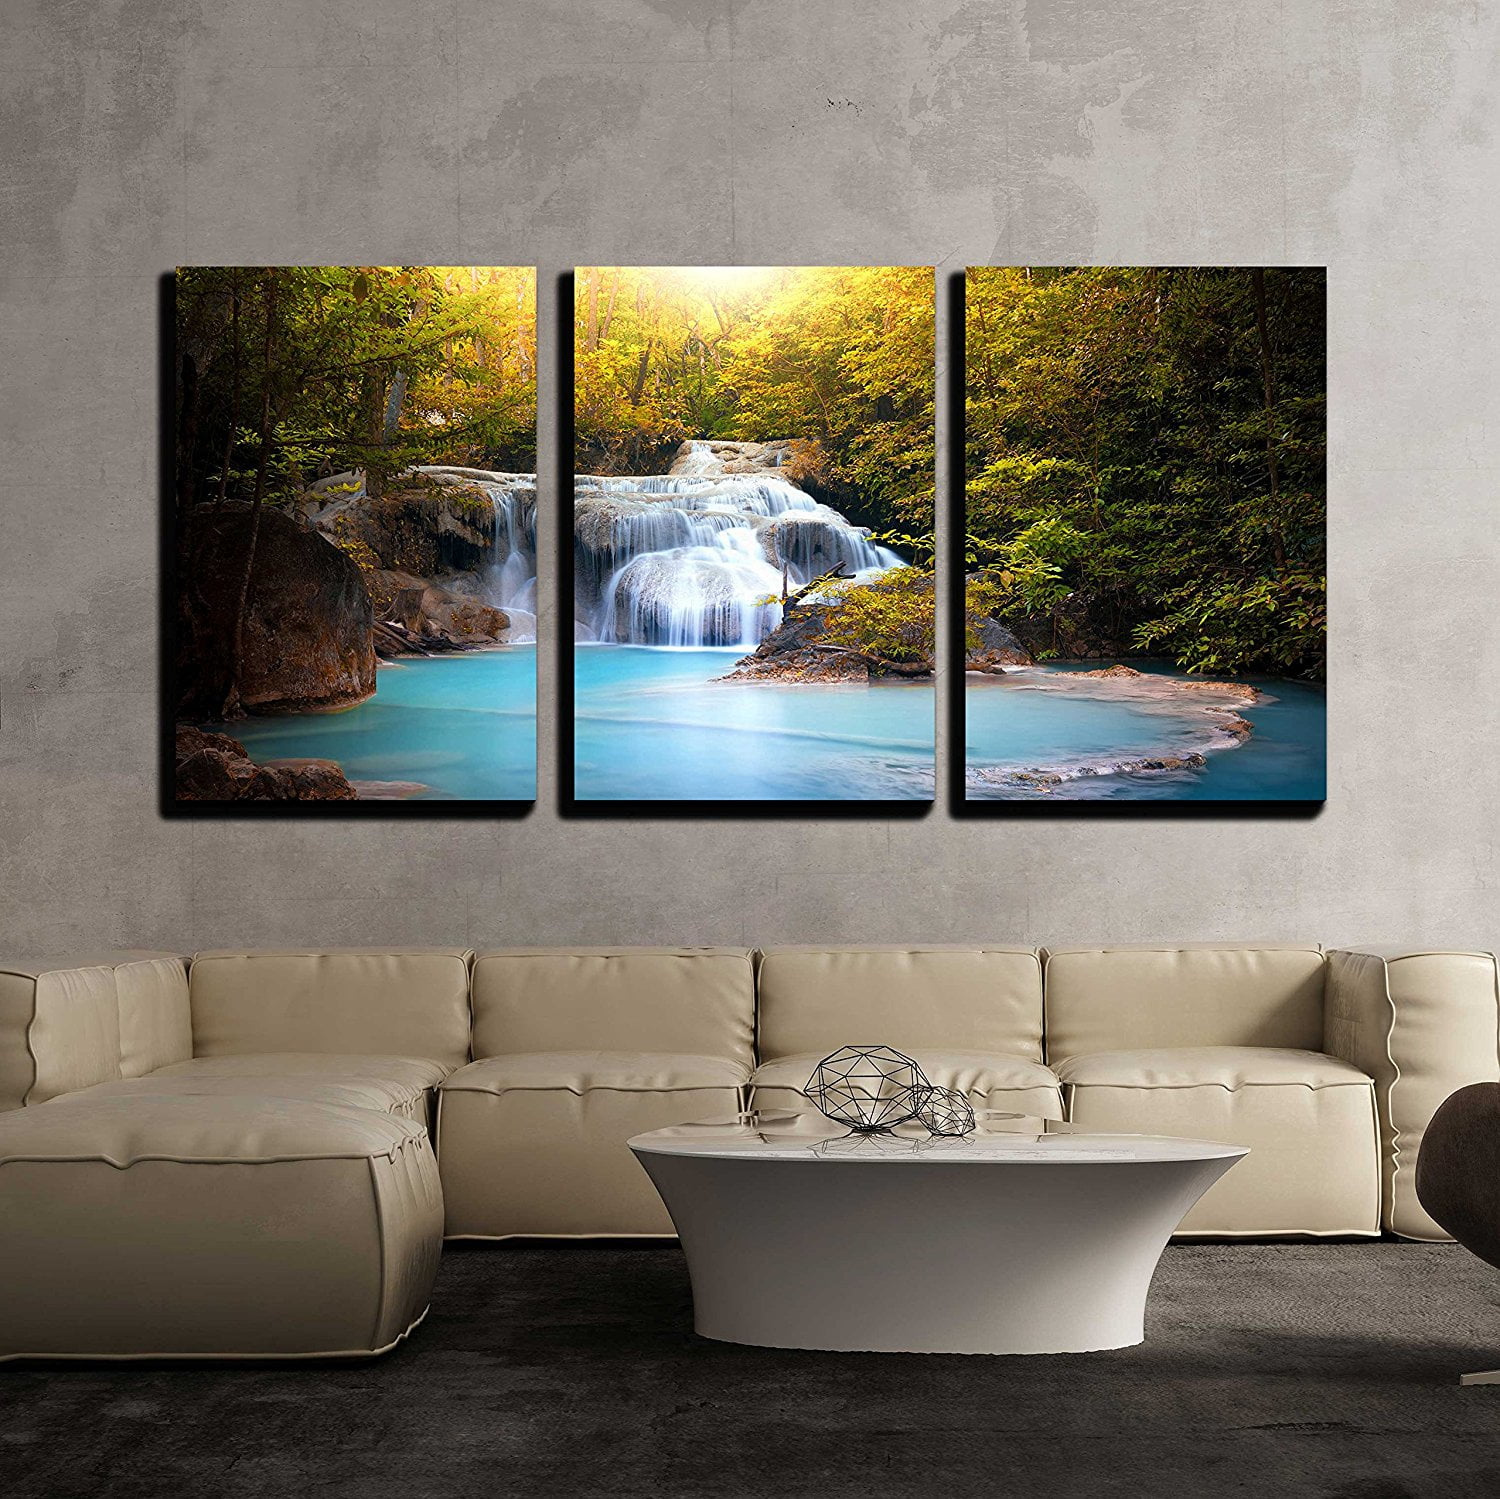 3 Pieces Modern Canvas Painting Wall Art The Picture Turquoise Water and Sunny Beams in Plitvice Lakes National Park Croatia Landscape Mountain & Lake Print on Canvas Giclee Artwork Wall Decor